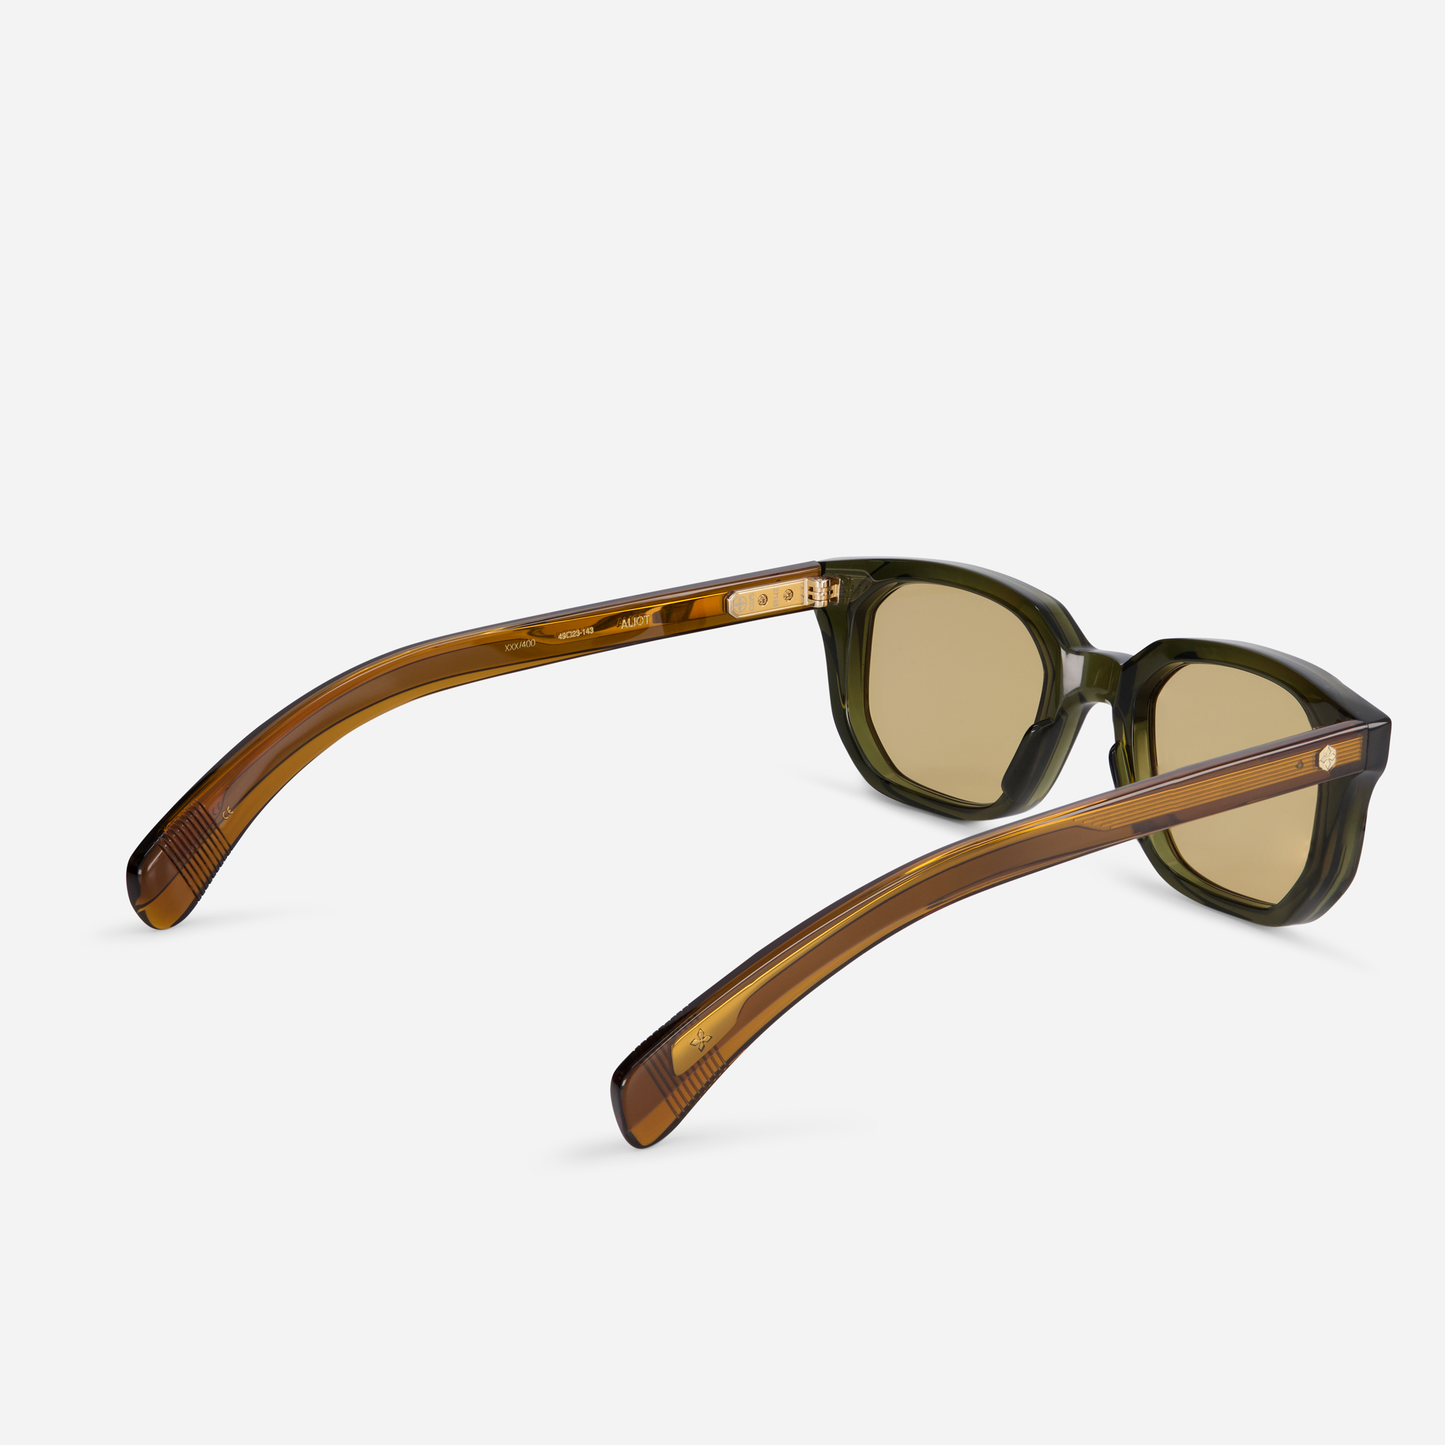 Aliot B-1 offers a Japanese acetate frame in Bombardier color and yellow-brown lenses for a contemporary look.